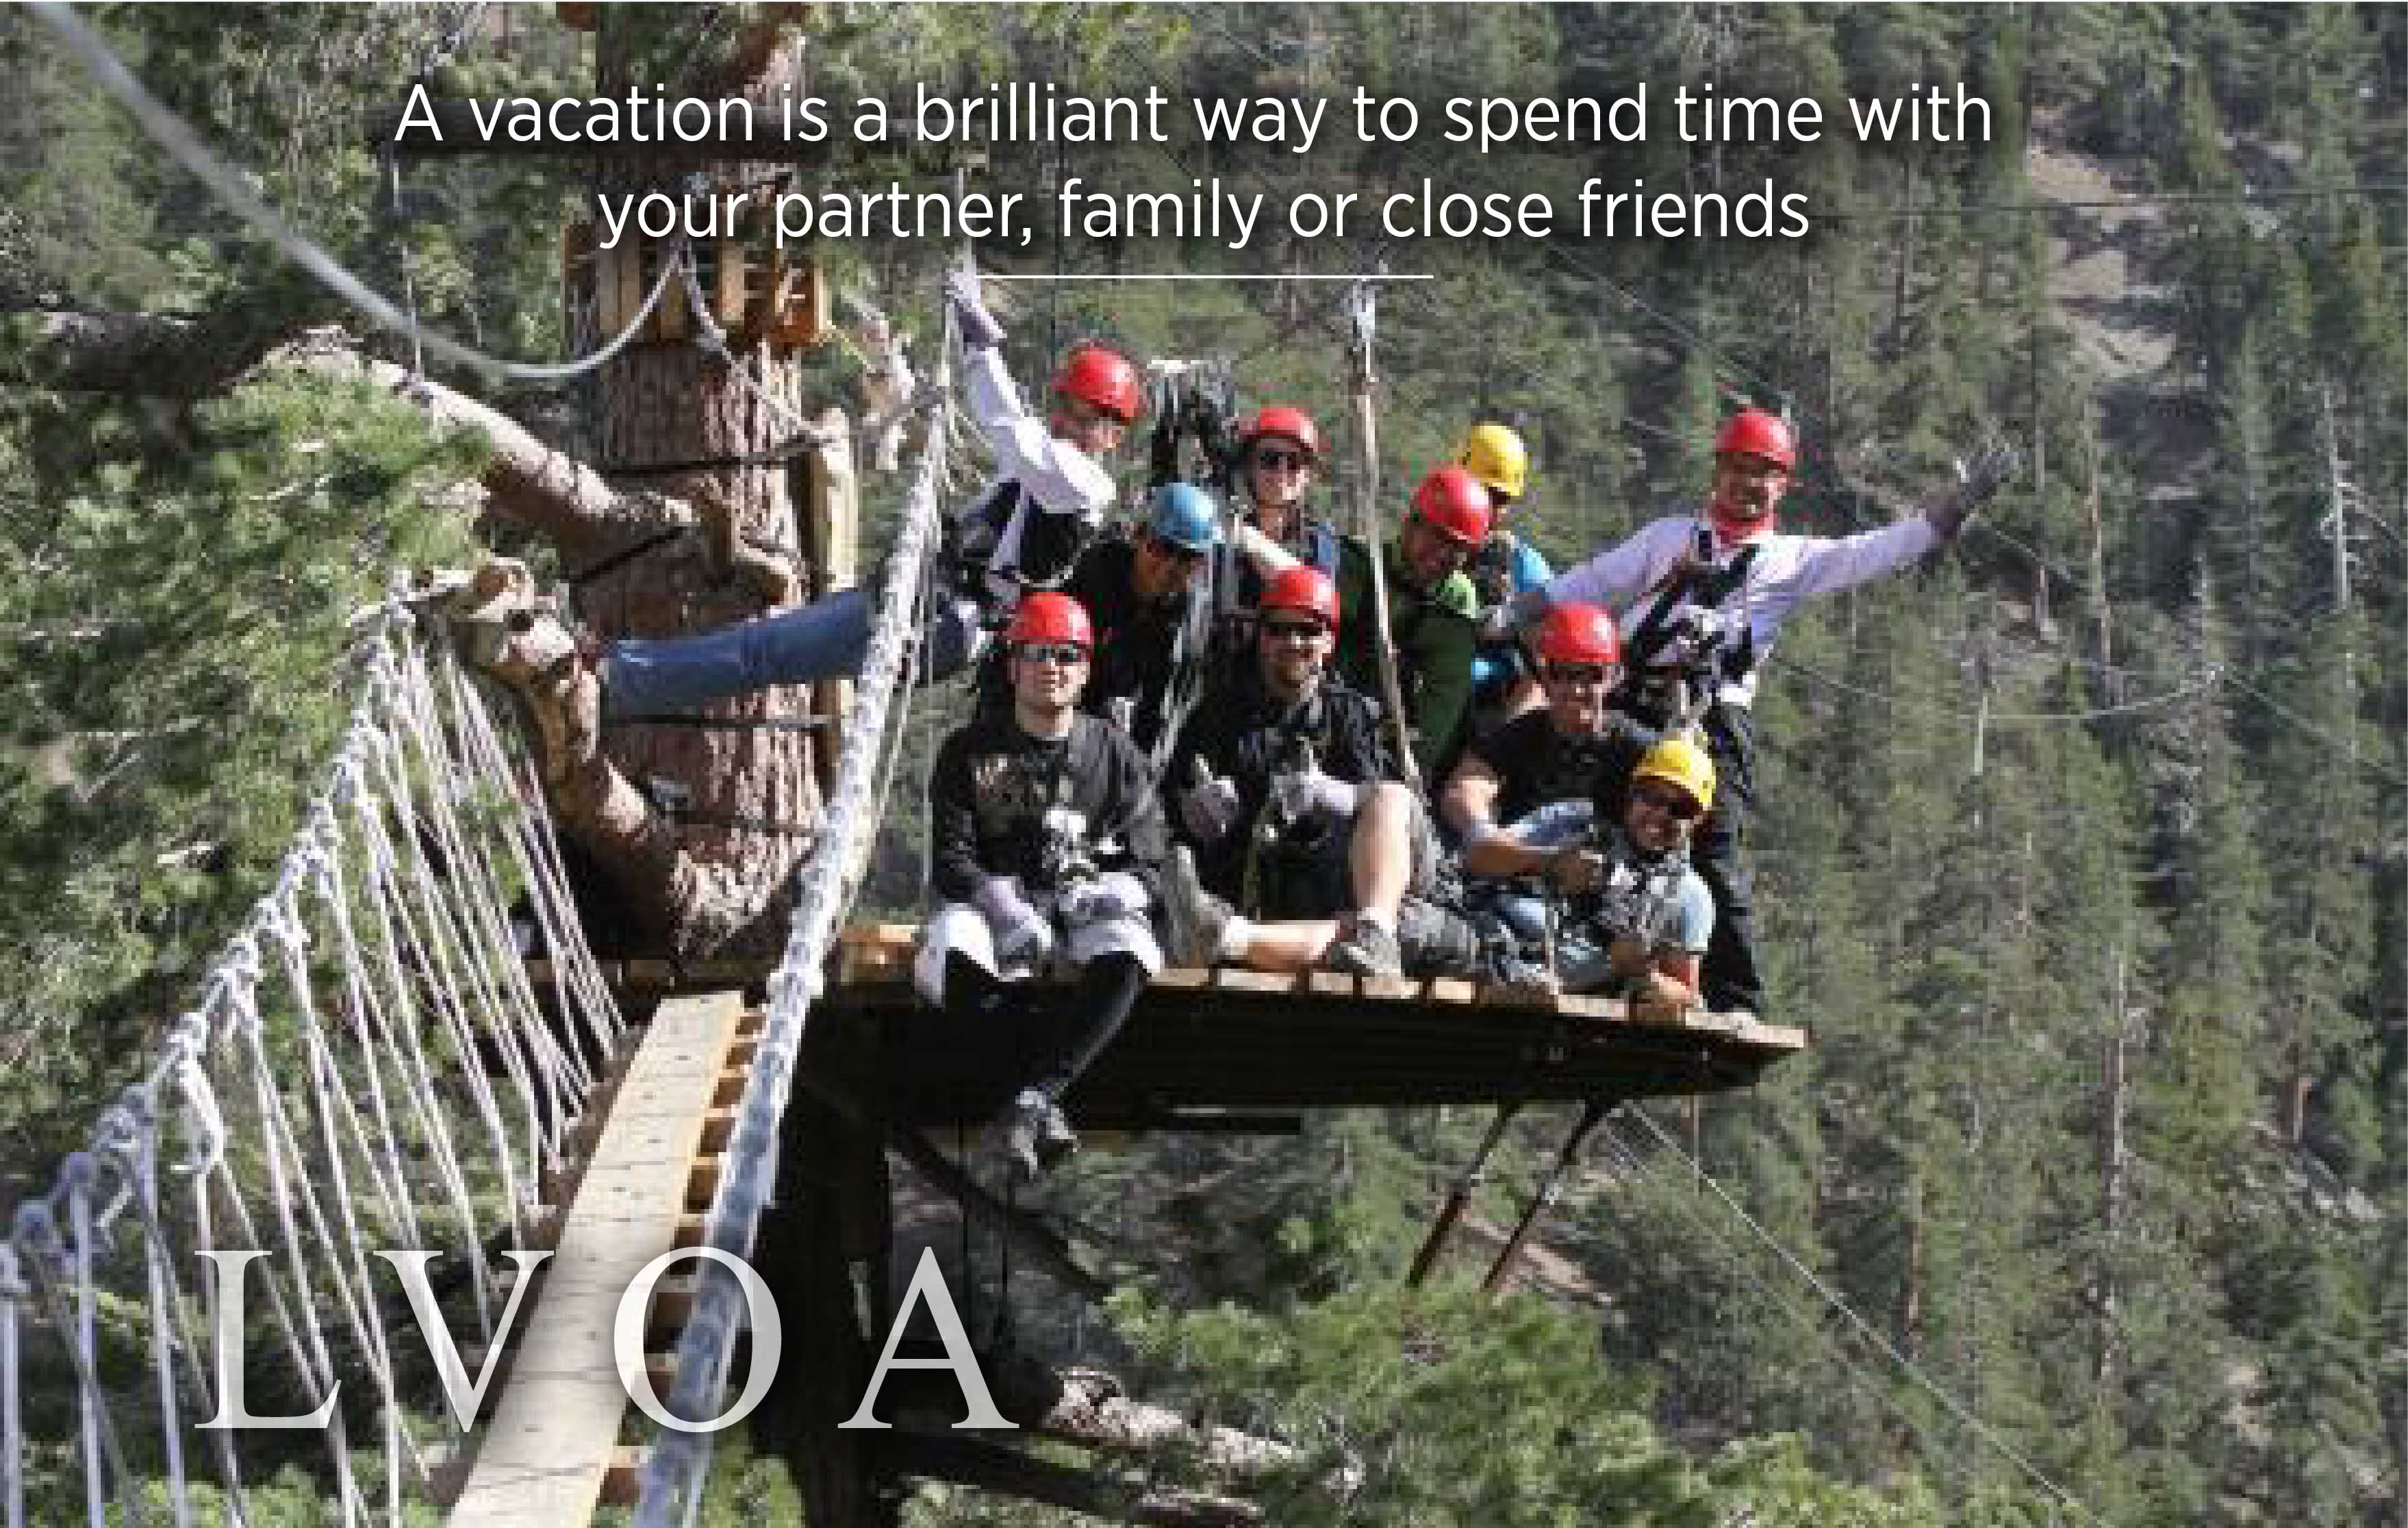 A vacation is a brilliant way to spend time with your partner, family or close friends_LVO_Associates